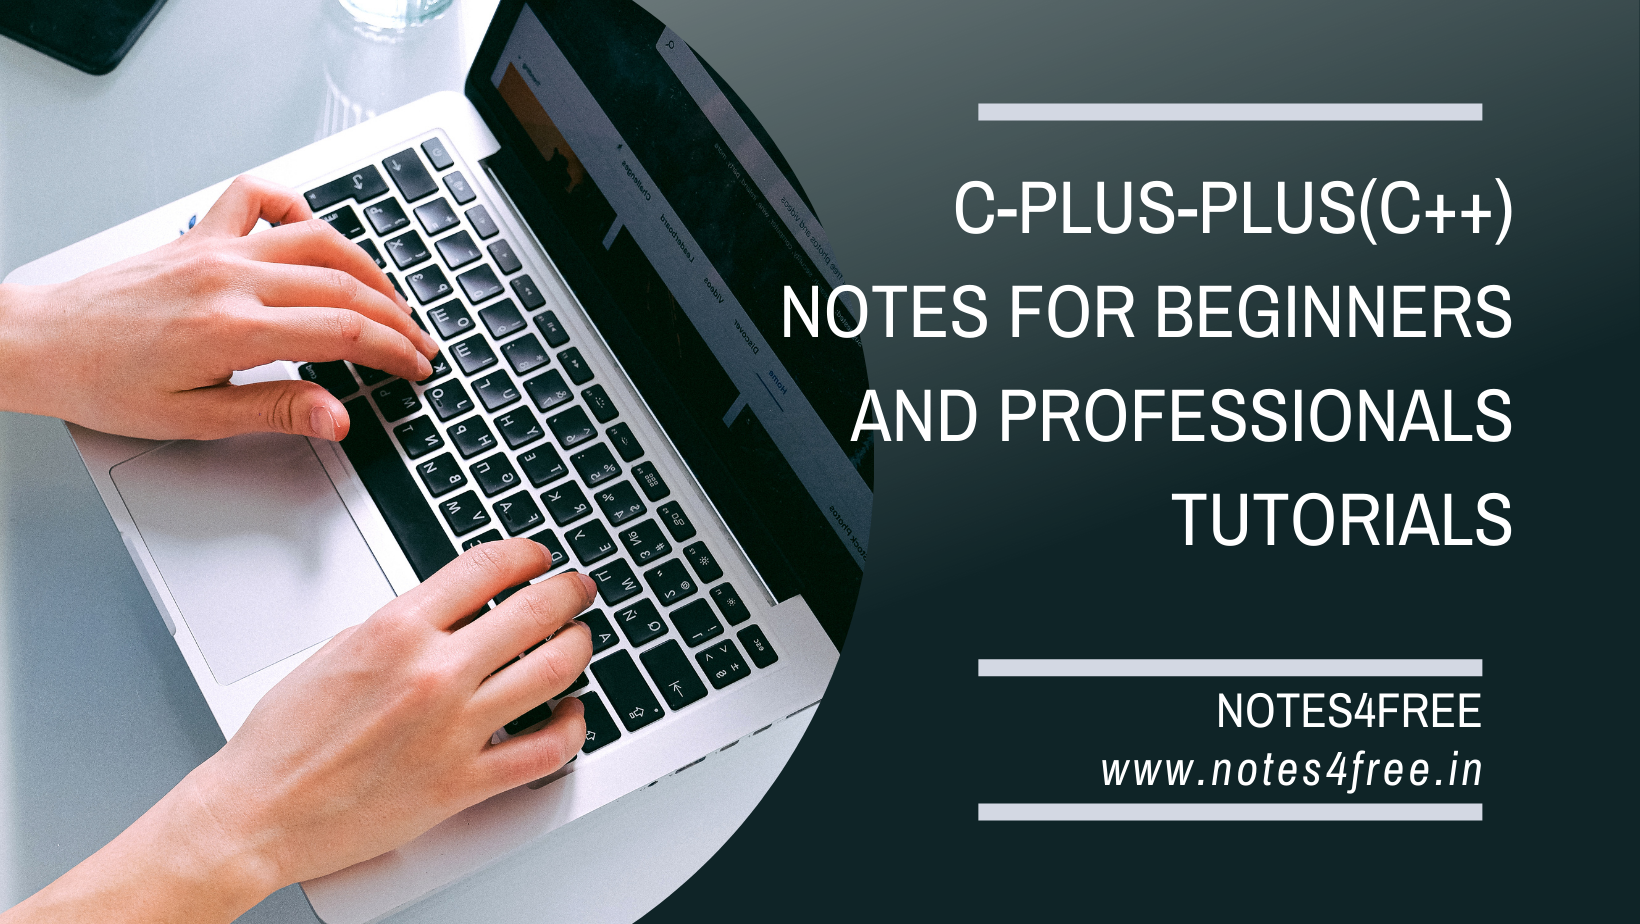  C-puls-plus Notes for beginners and Professionals books